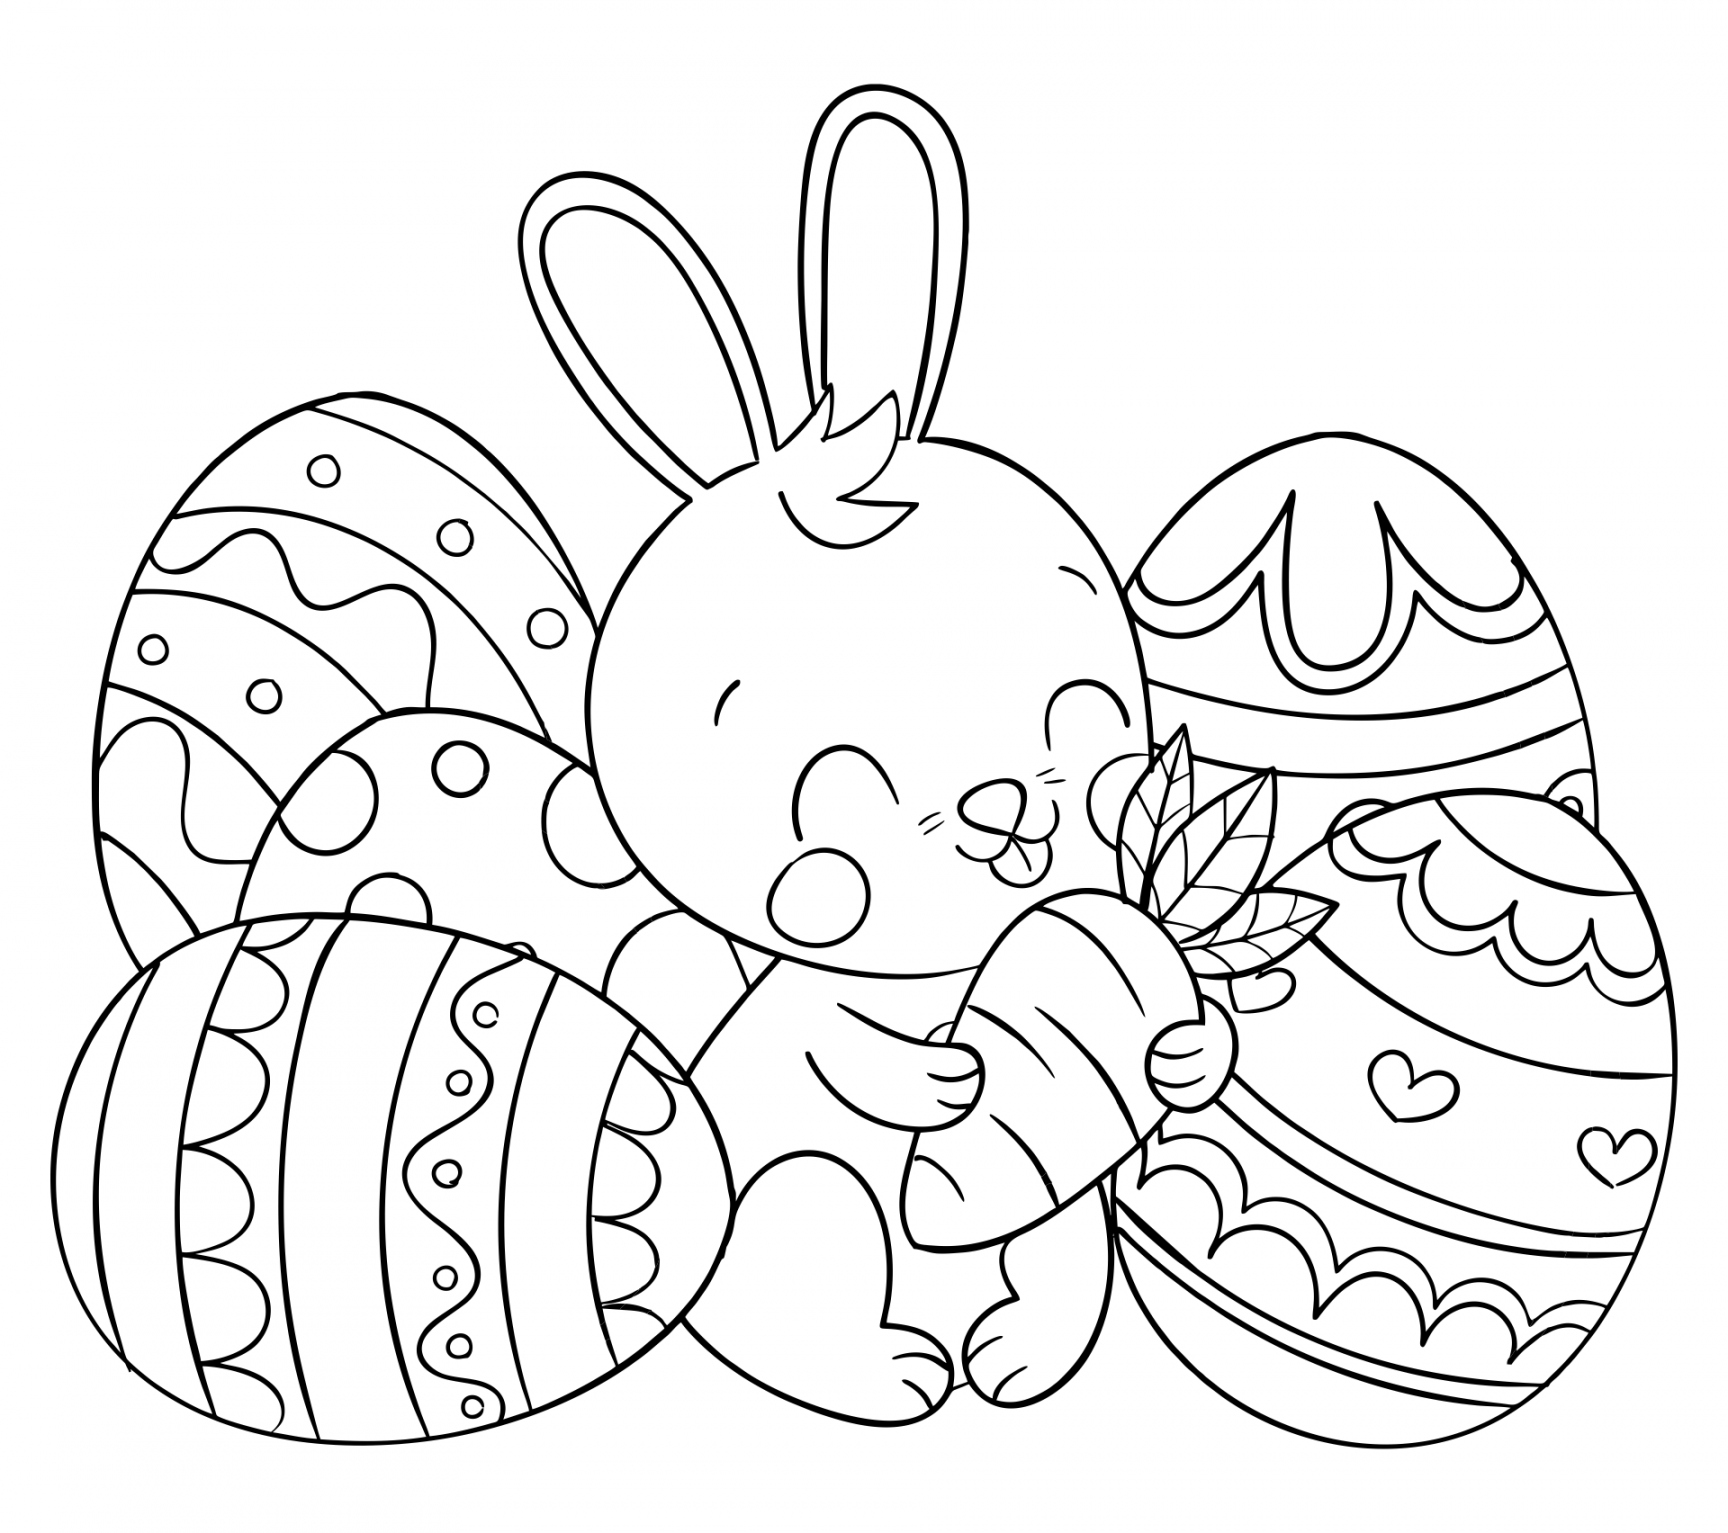 Free Printable Coloring Pages For Easter - Printable -  Best Free Printable Easter Egg Coloring Page - printablee